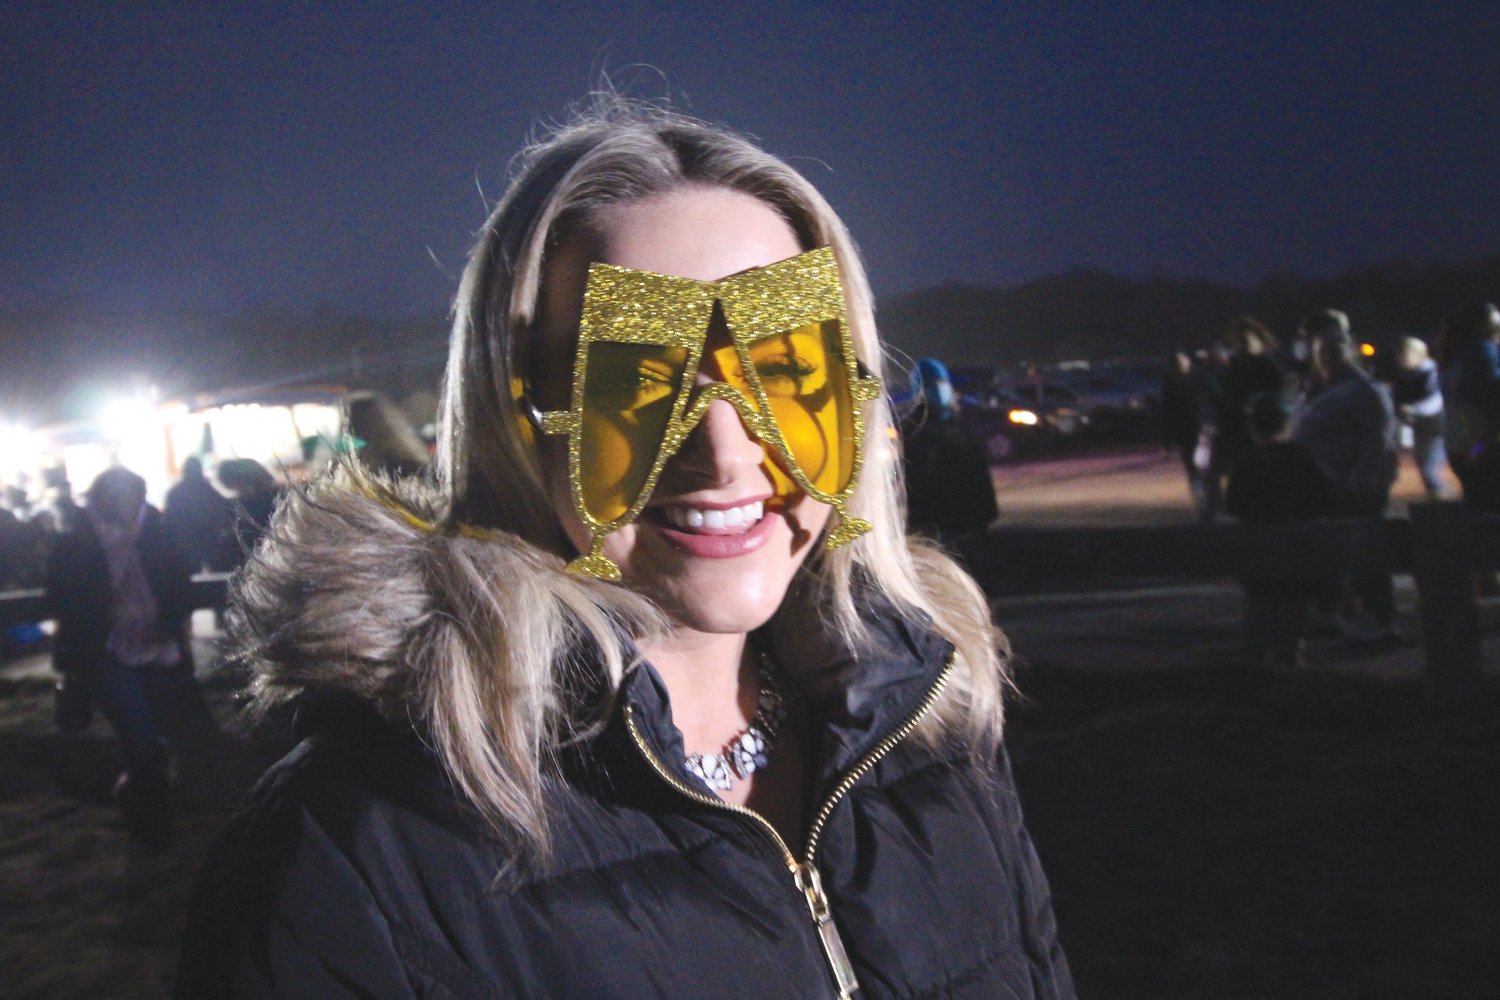 SHE GOT APPROVAL: Before slipping on her champagne “glasses” for a live broadcast from Rocky Point, Channel 10 reporter Sam Reed said she got the director’s approval.